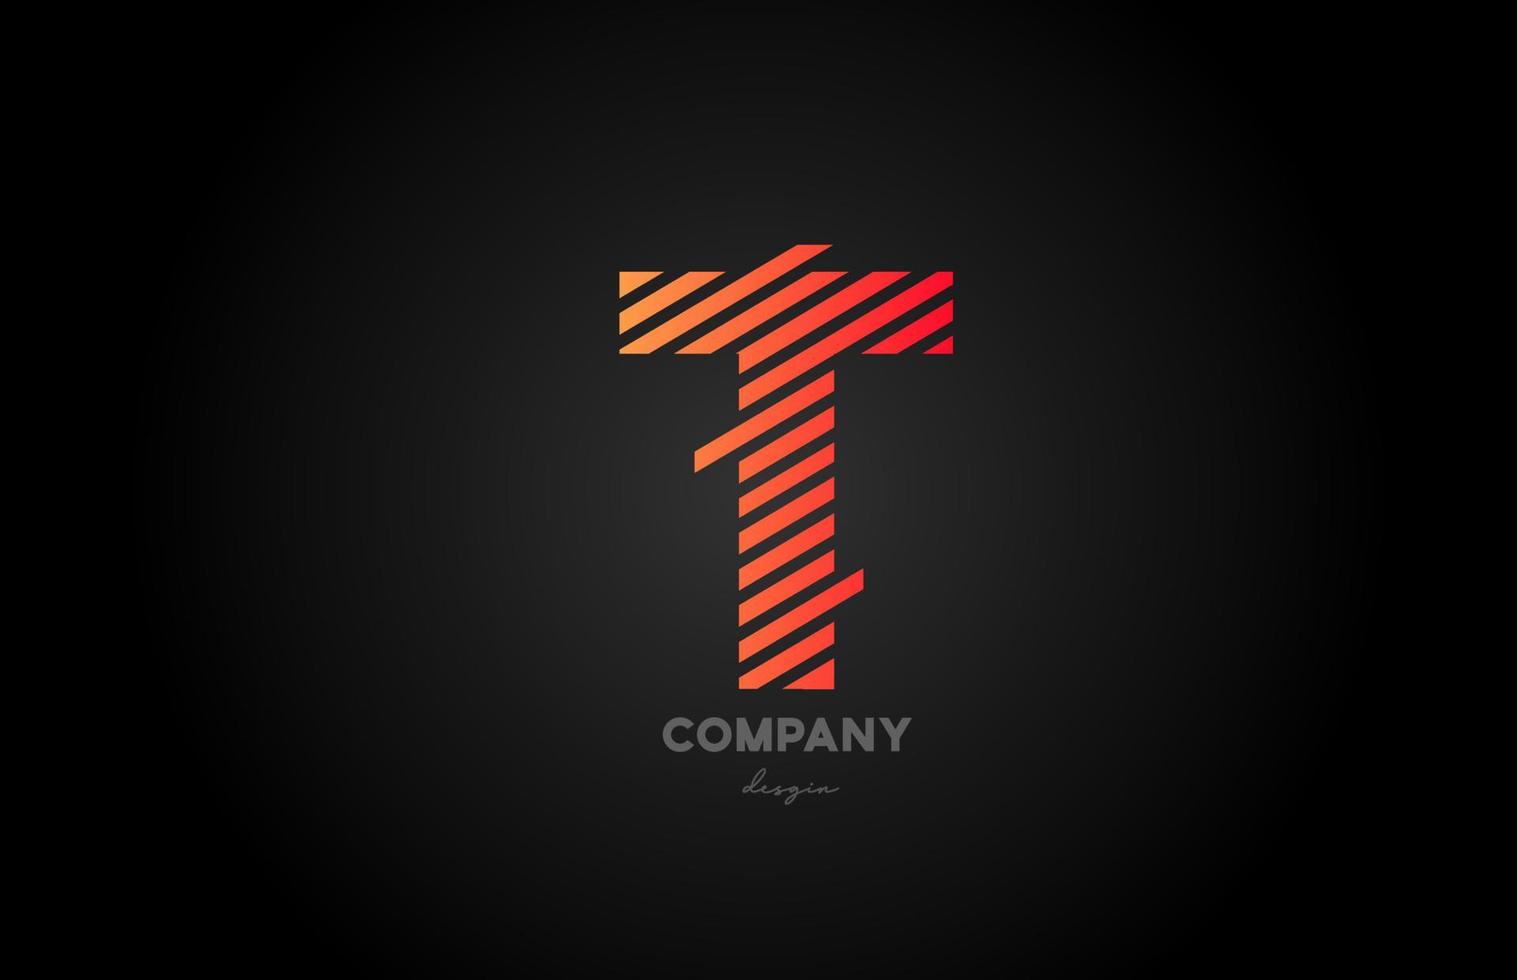 T orange alphabet letter logo icon design for business and company vector